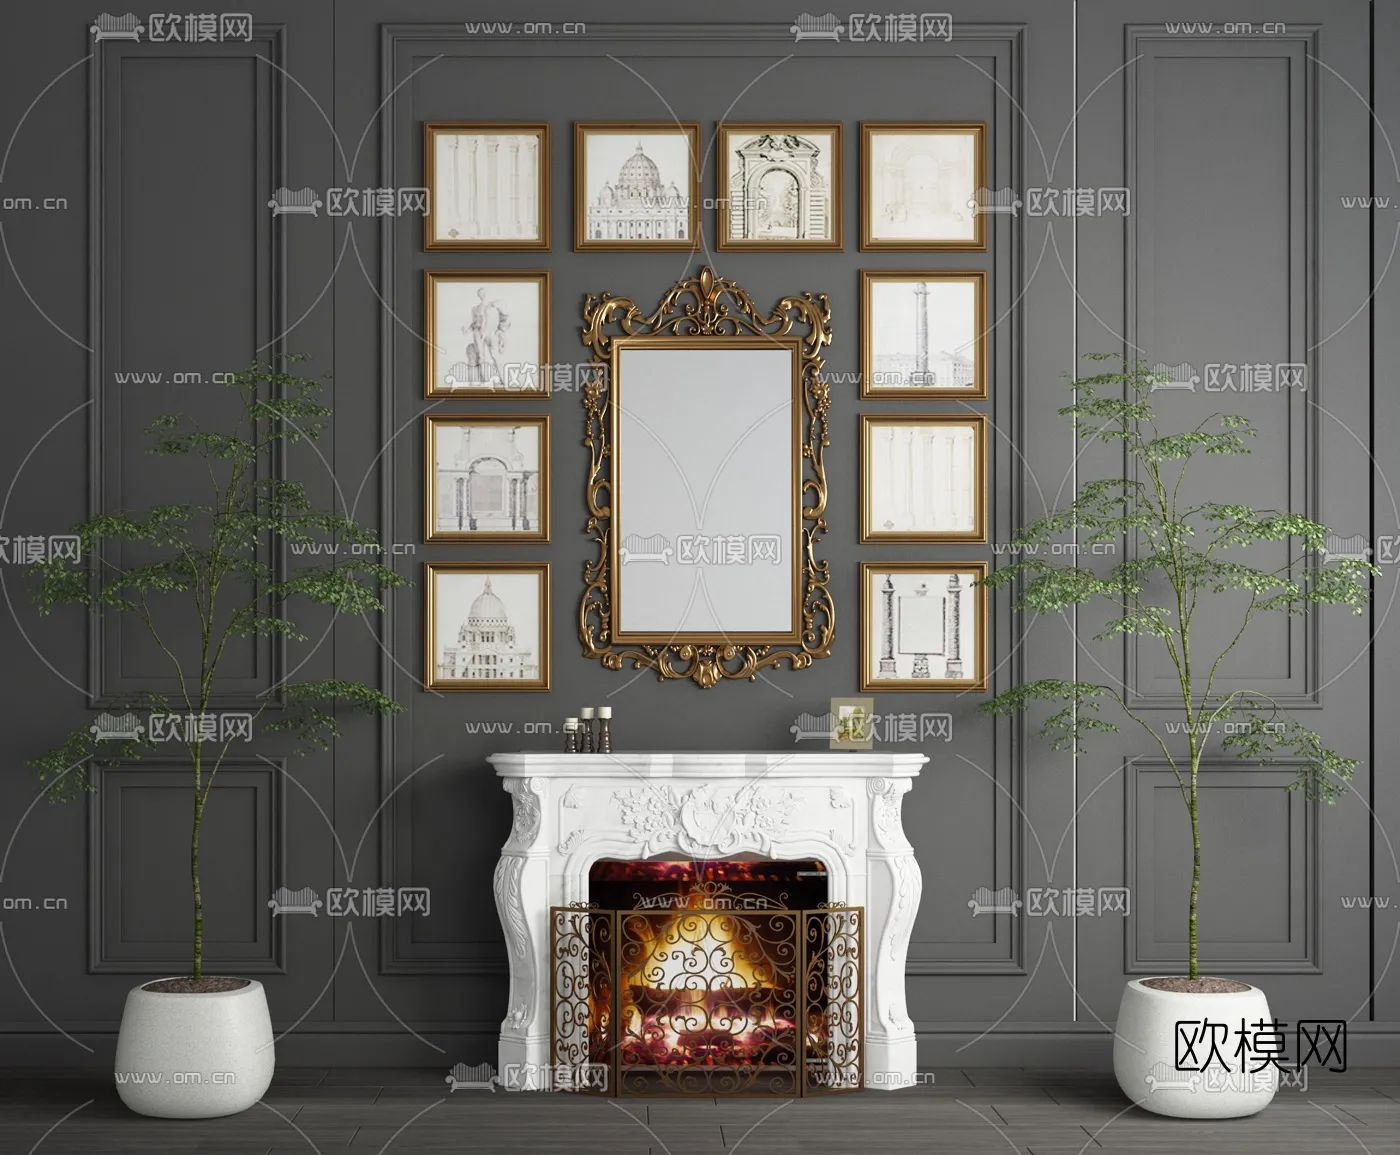 CLASSIC – FIREPLACE 3DMODELS – 007